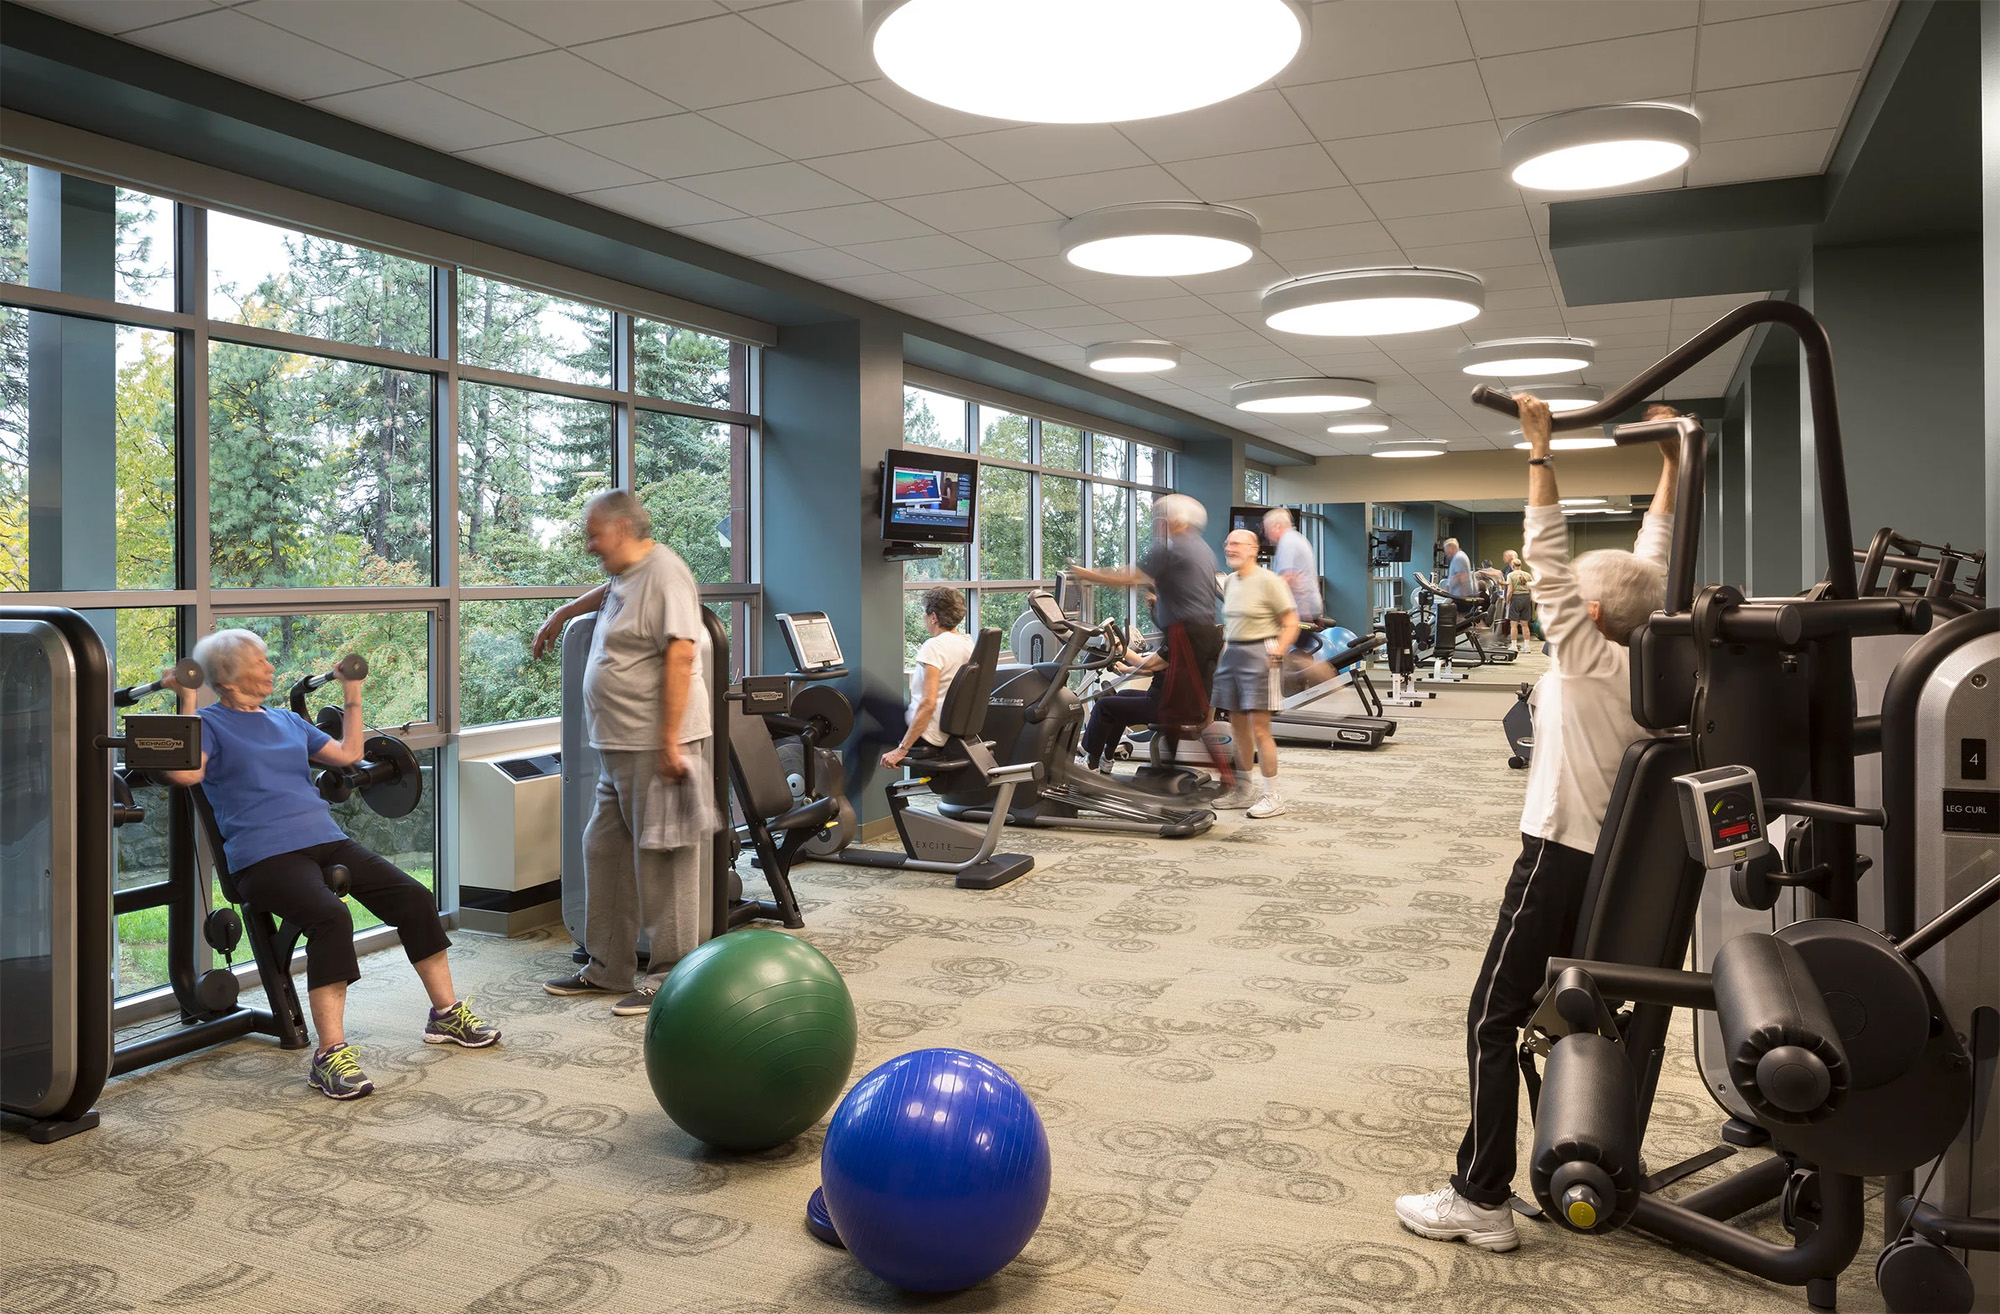 The fitness center at the Summit at Rockwood, a senior living community on Spokane, WA